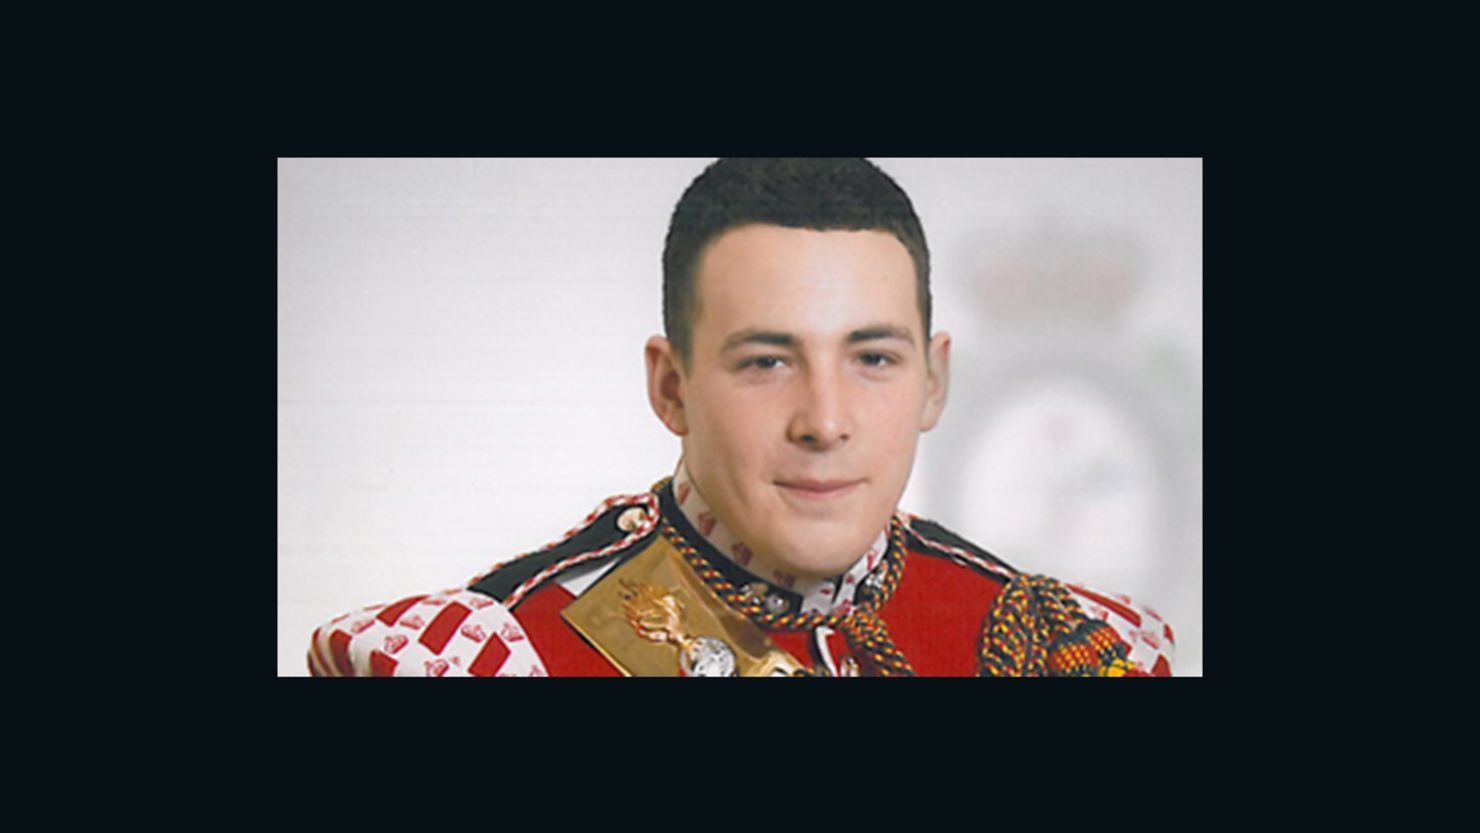 British soldier Lee Rigby was brutally murdered by two Muslim converts outside Woolwich Barracks in London in May 2013.